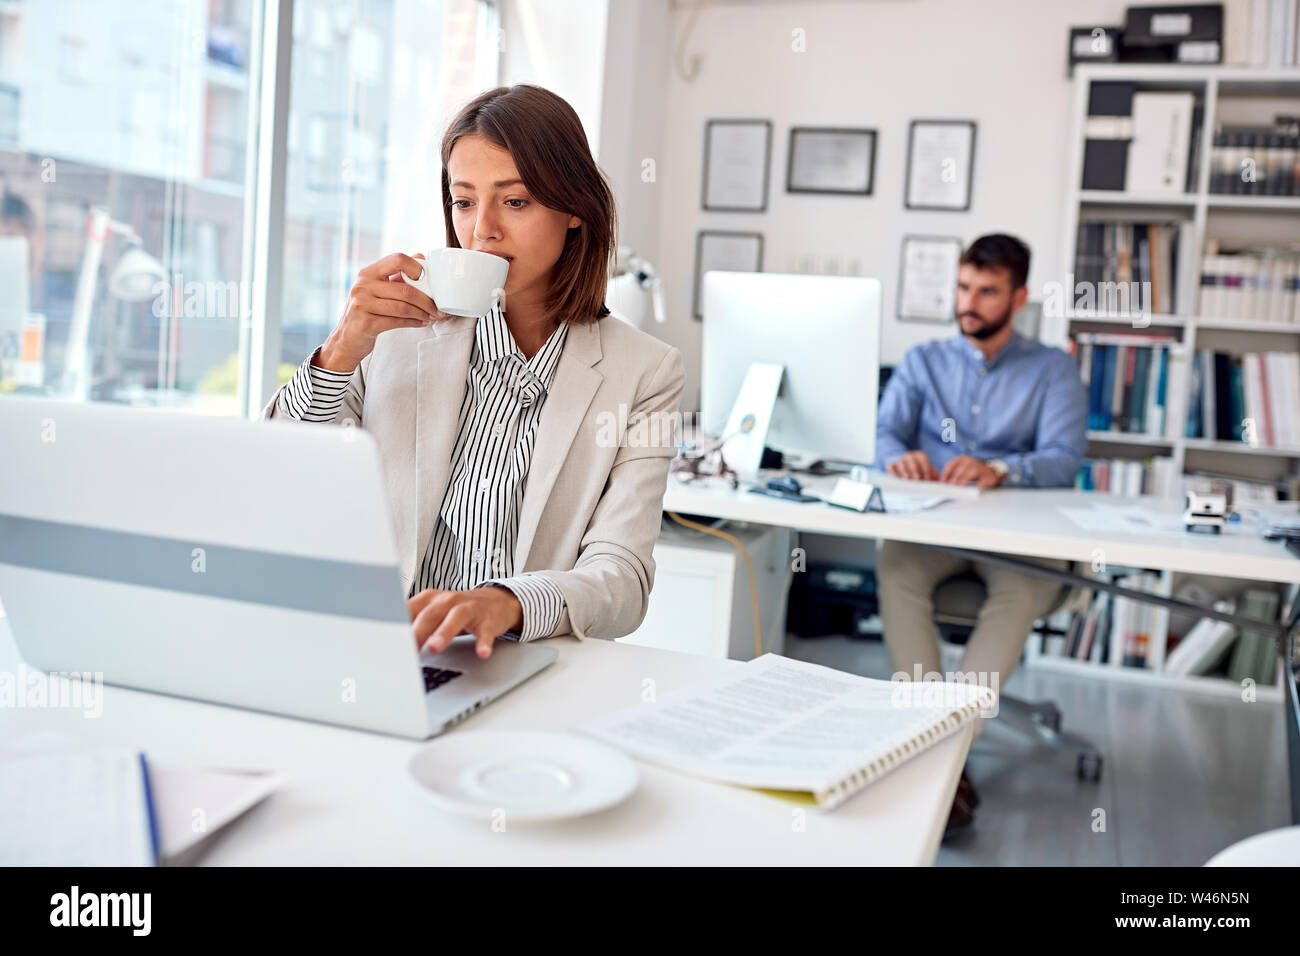 Business young woman drink coffee at work Stock Photo - Alamy